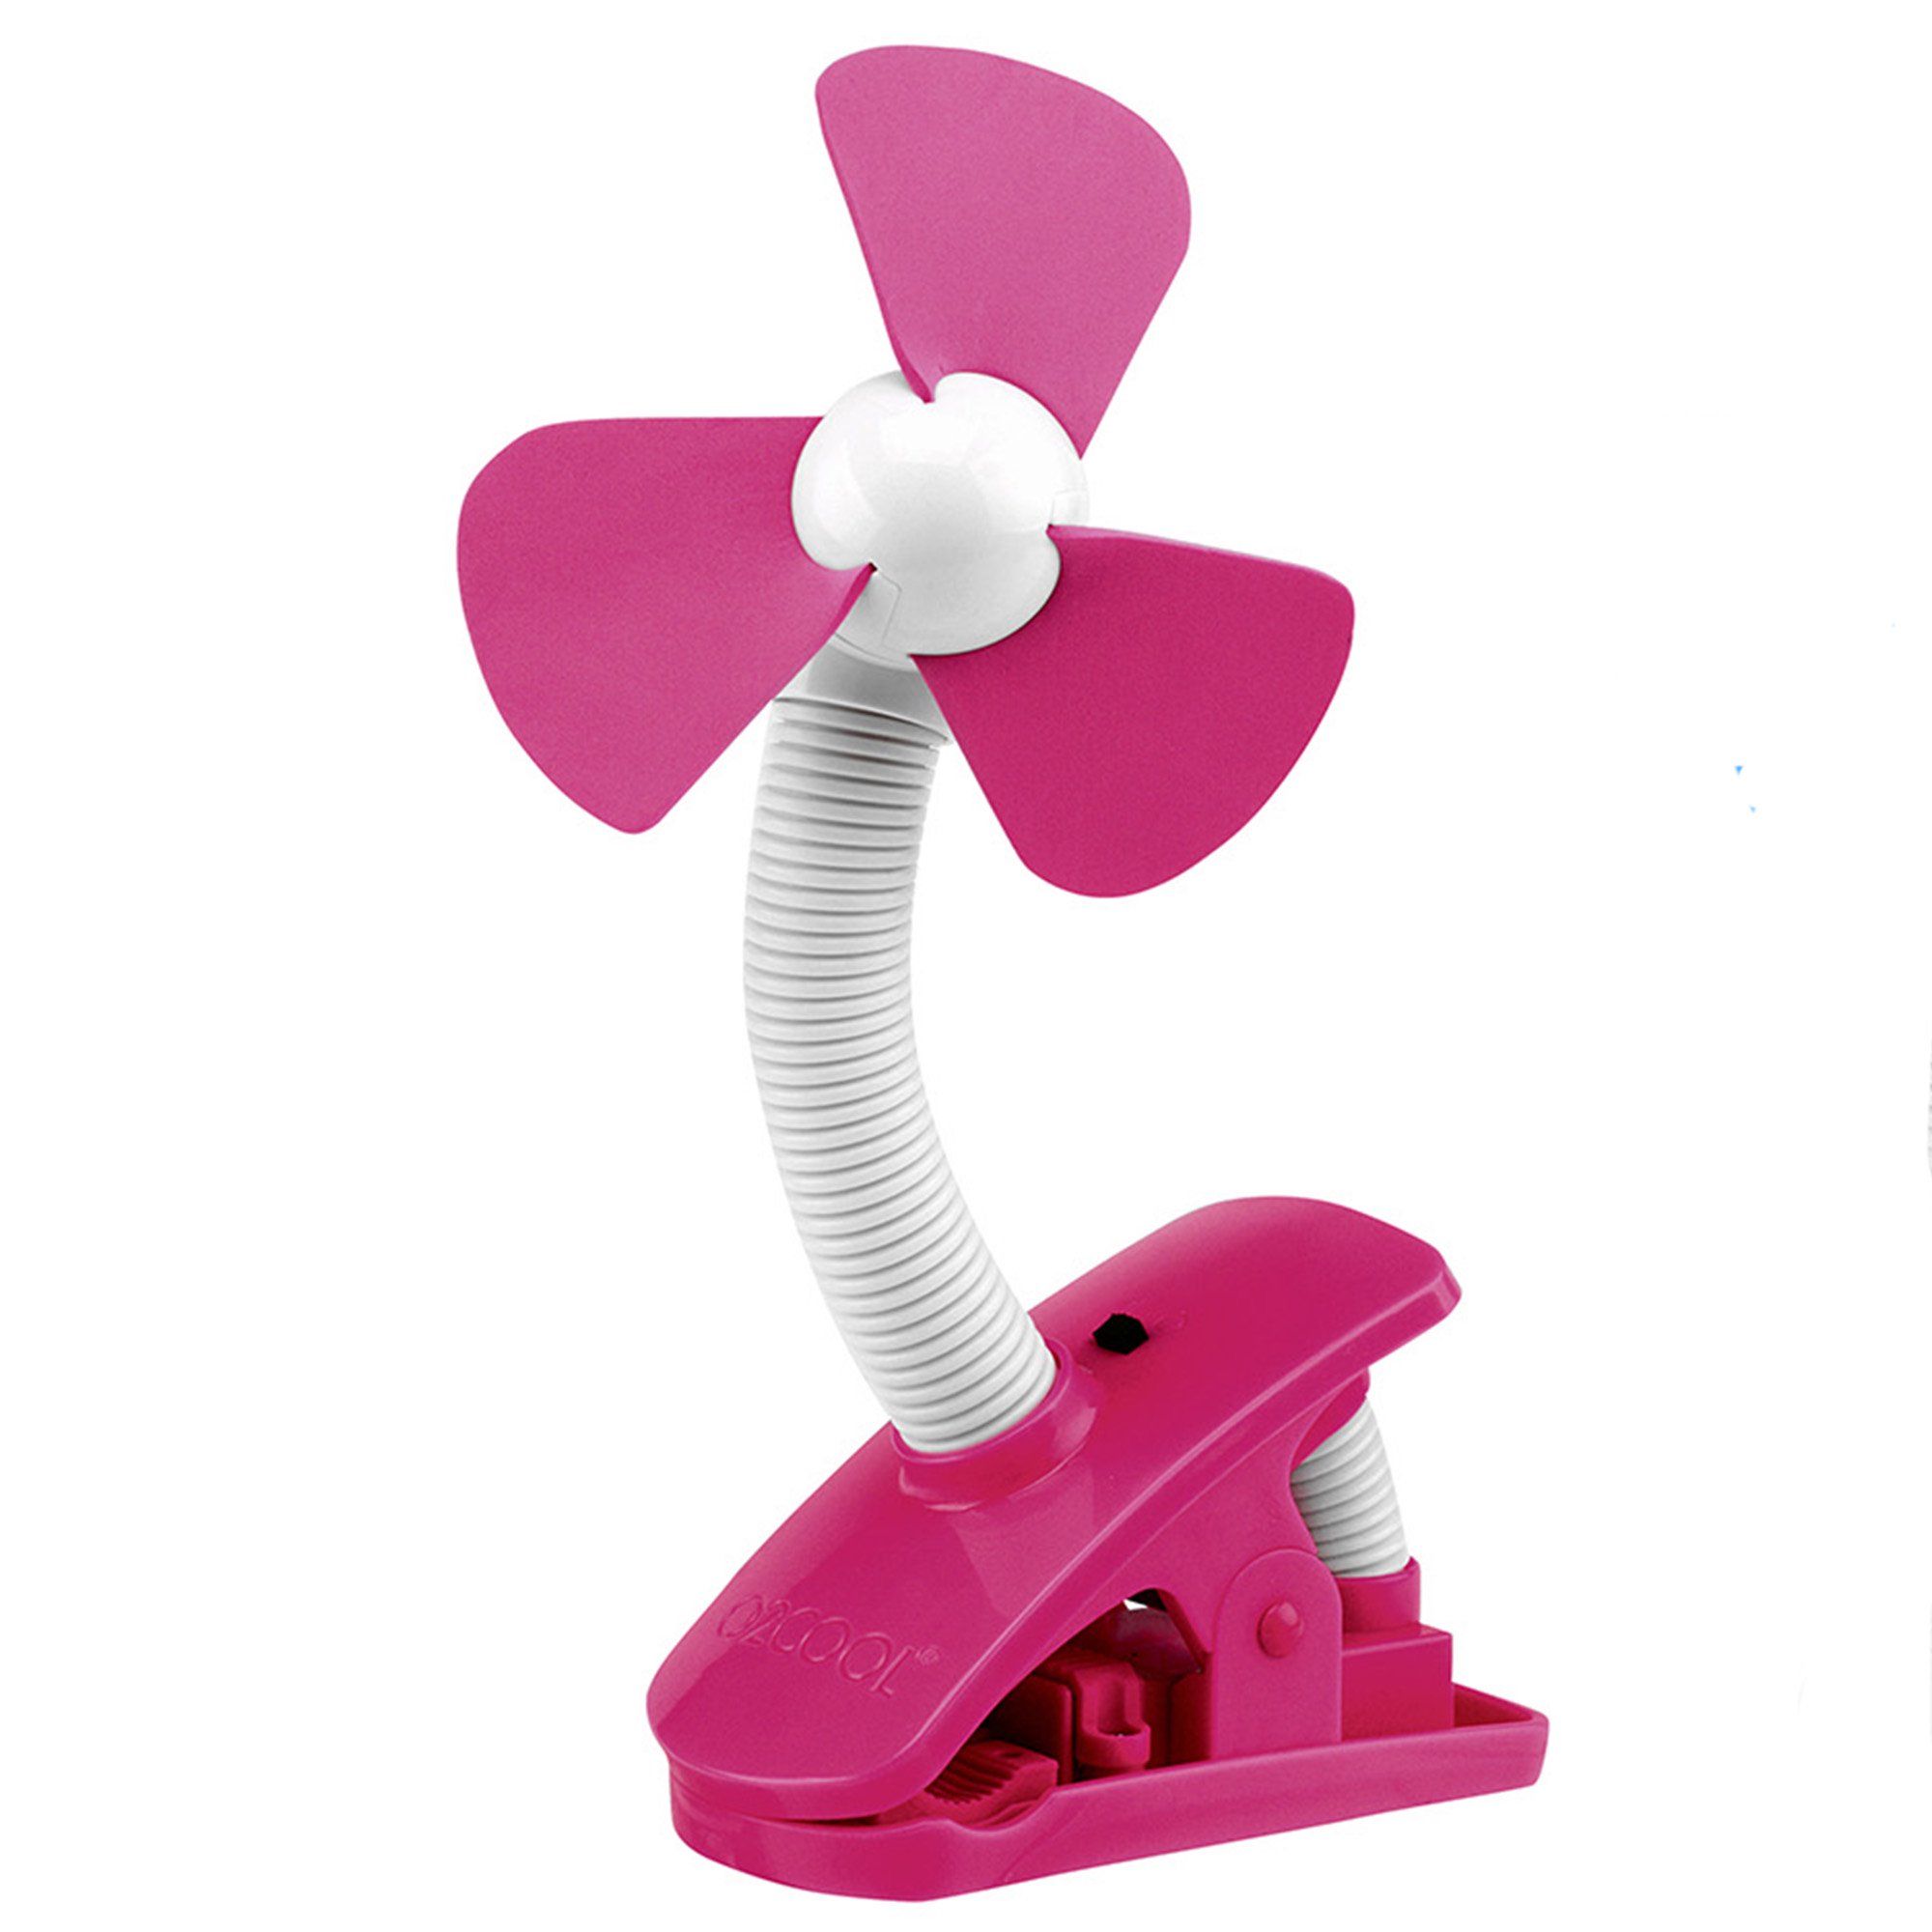 O2COOL 4 inch Portable Battery Powered Stroller Clip Fan, Pink and White | Walmart (US)